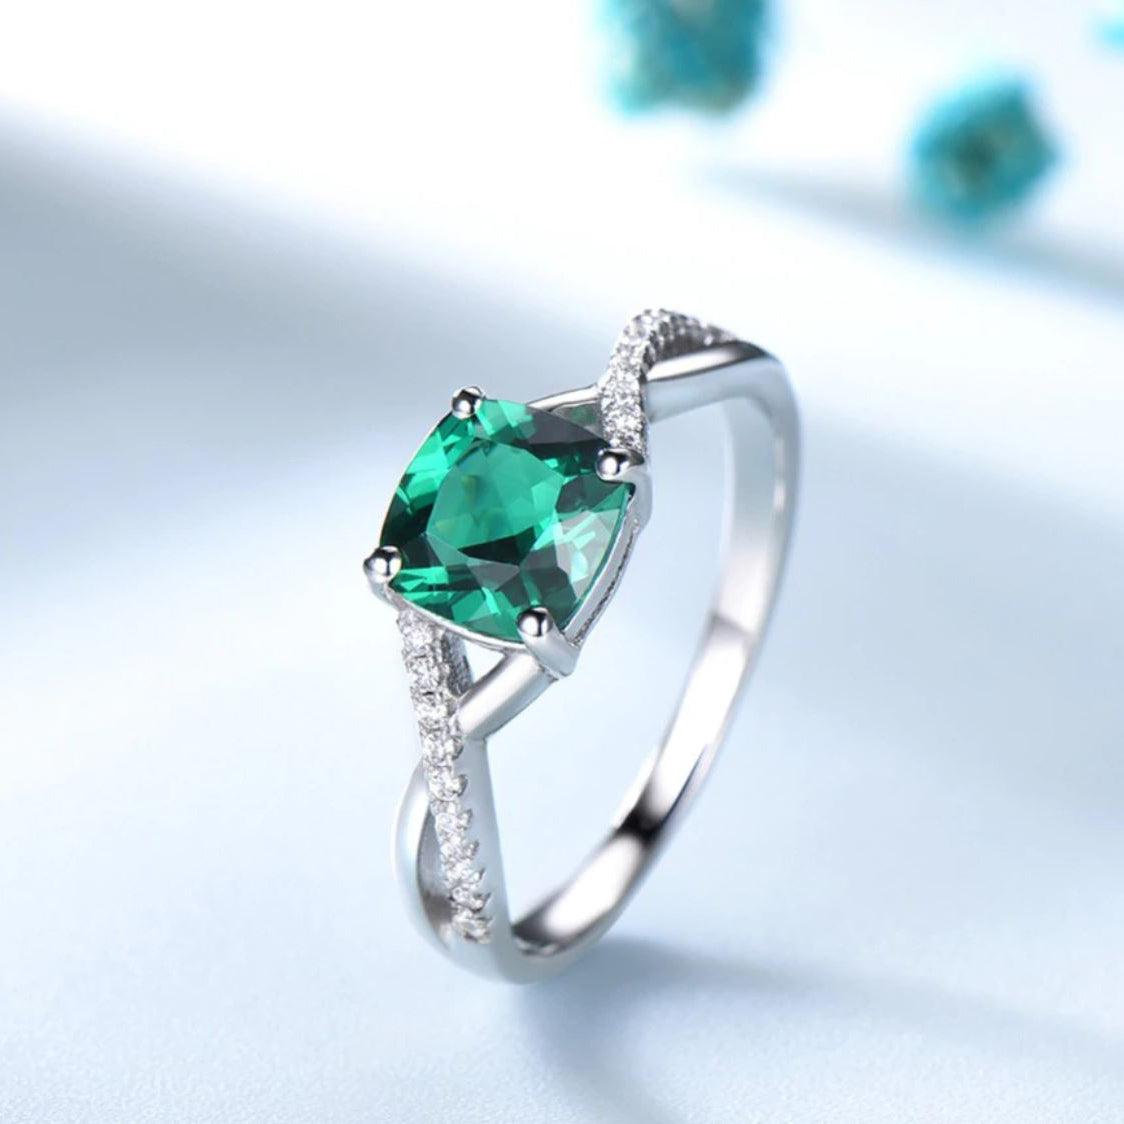 Emerald Engagement Ring for Women Cz Sterling Silver Ginger Lyne Collection - 6